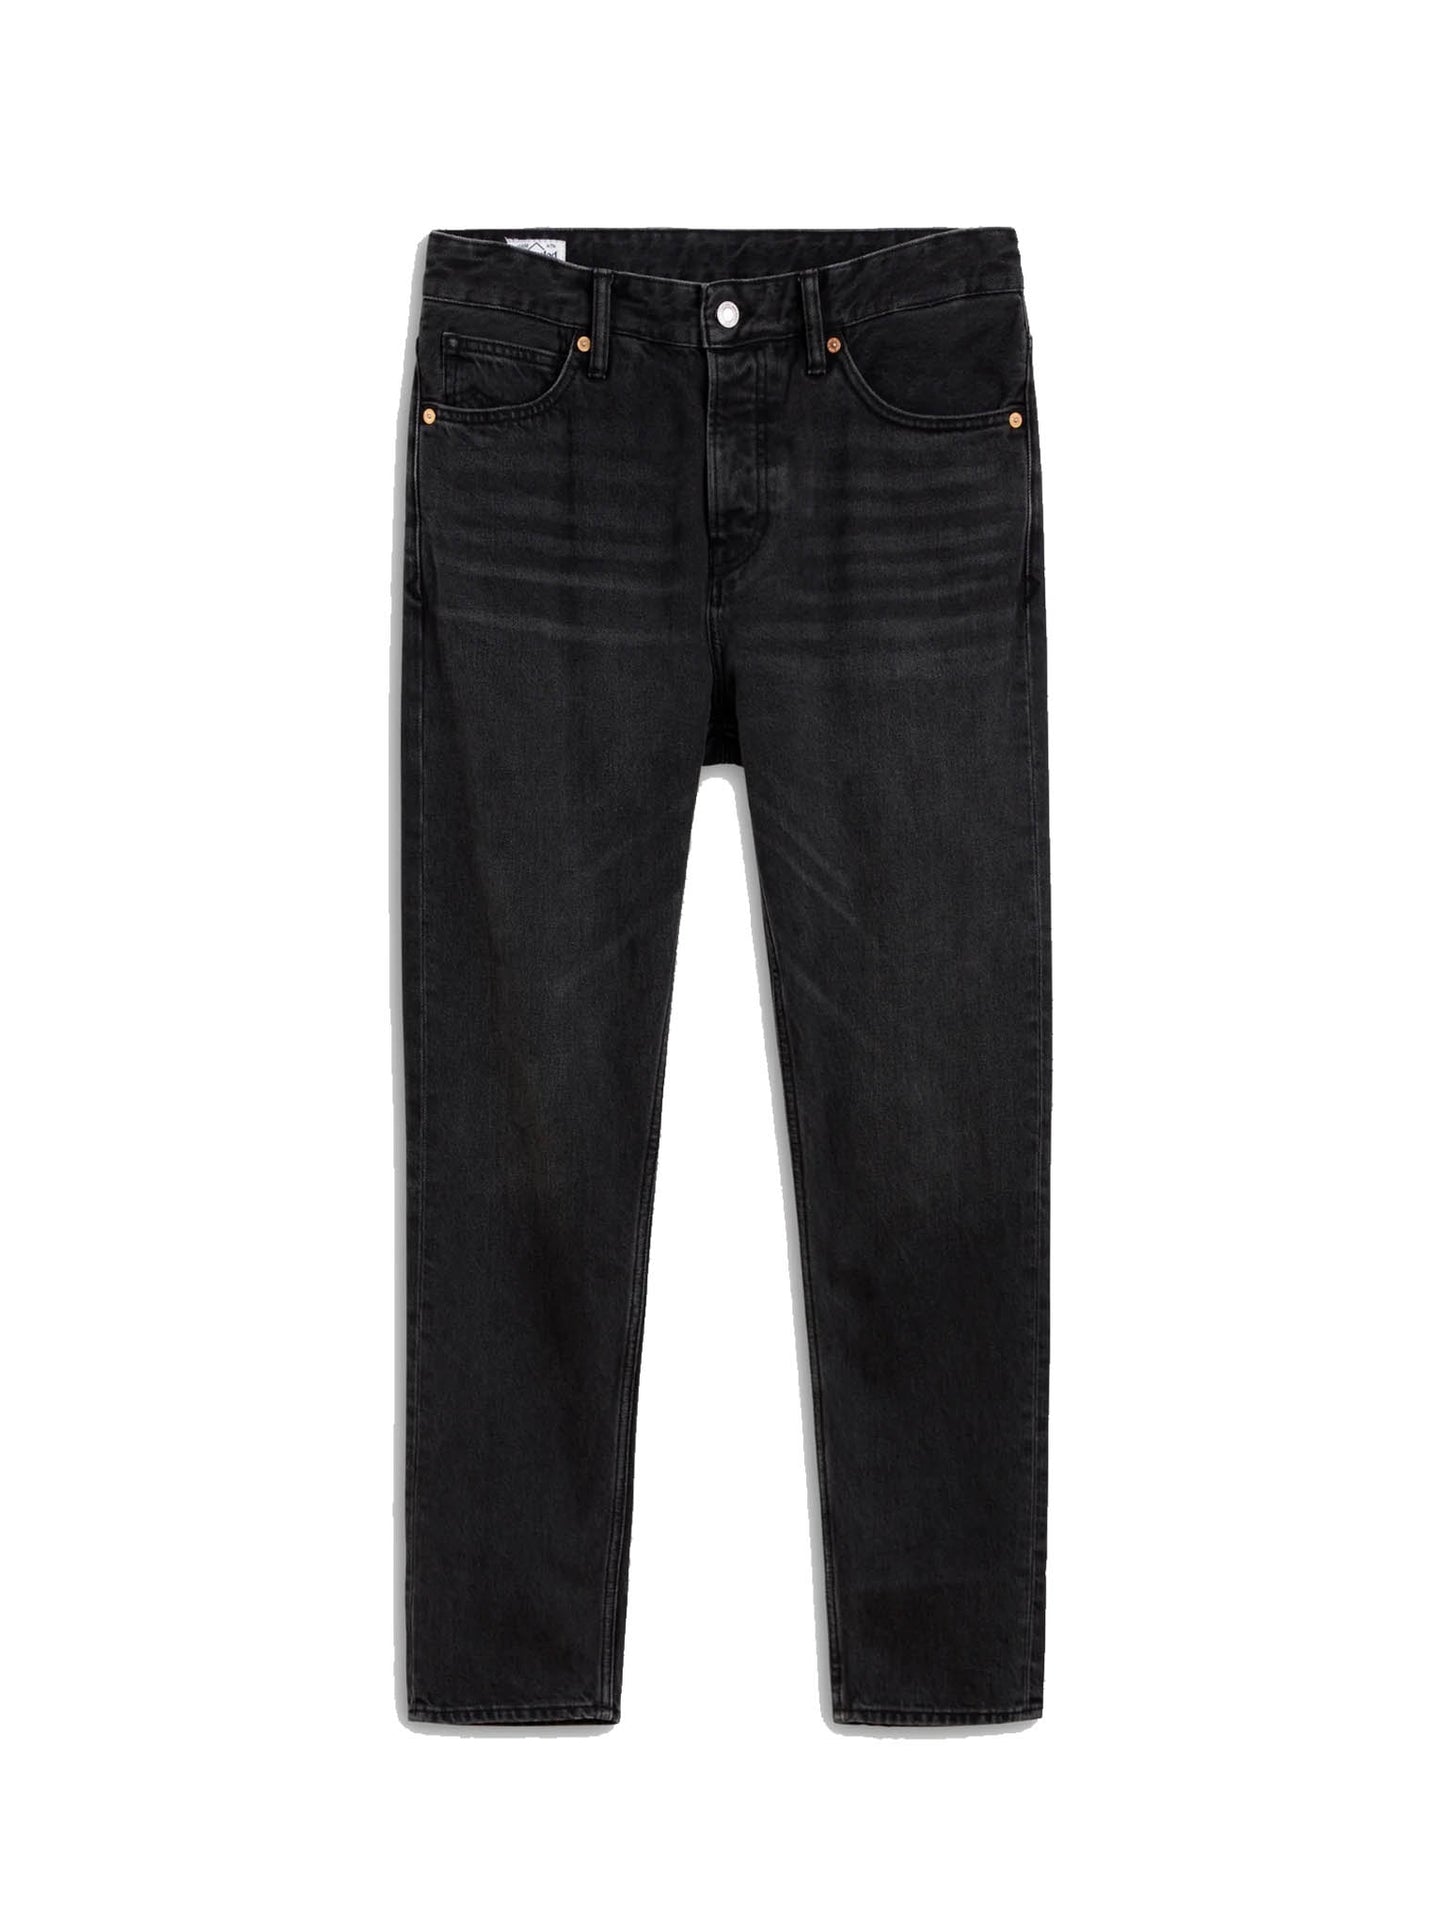 Kings of Indigo Jerrick Recycled Night Jeans cutout from front